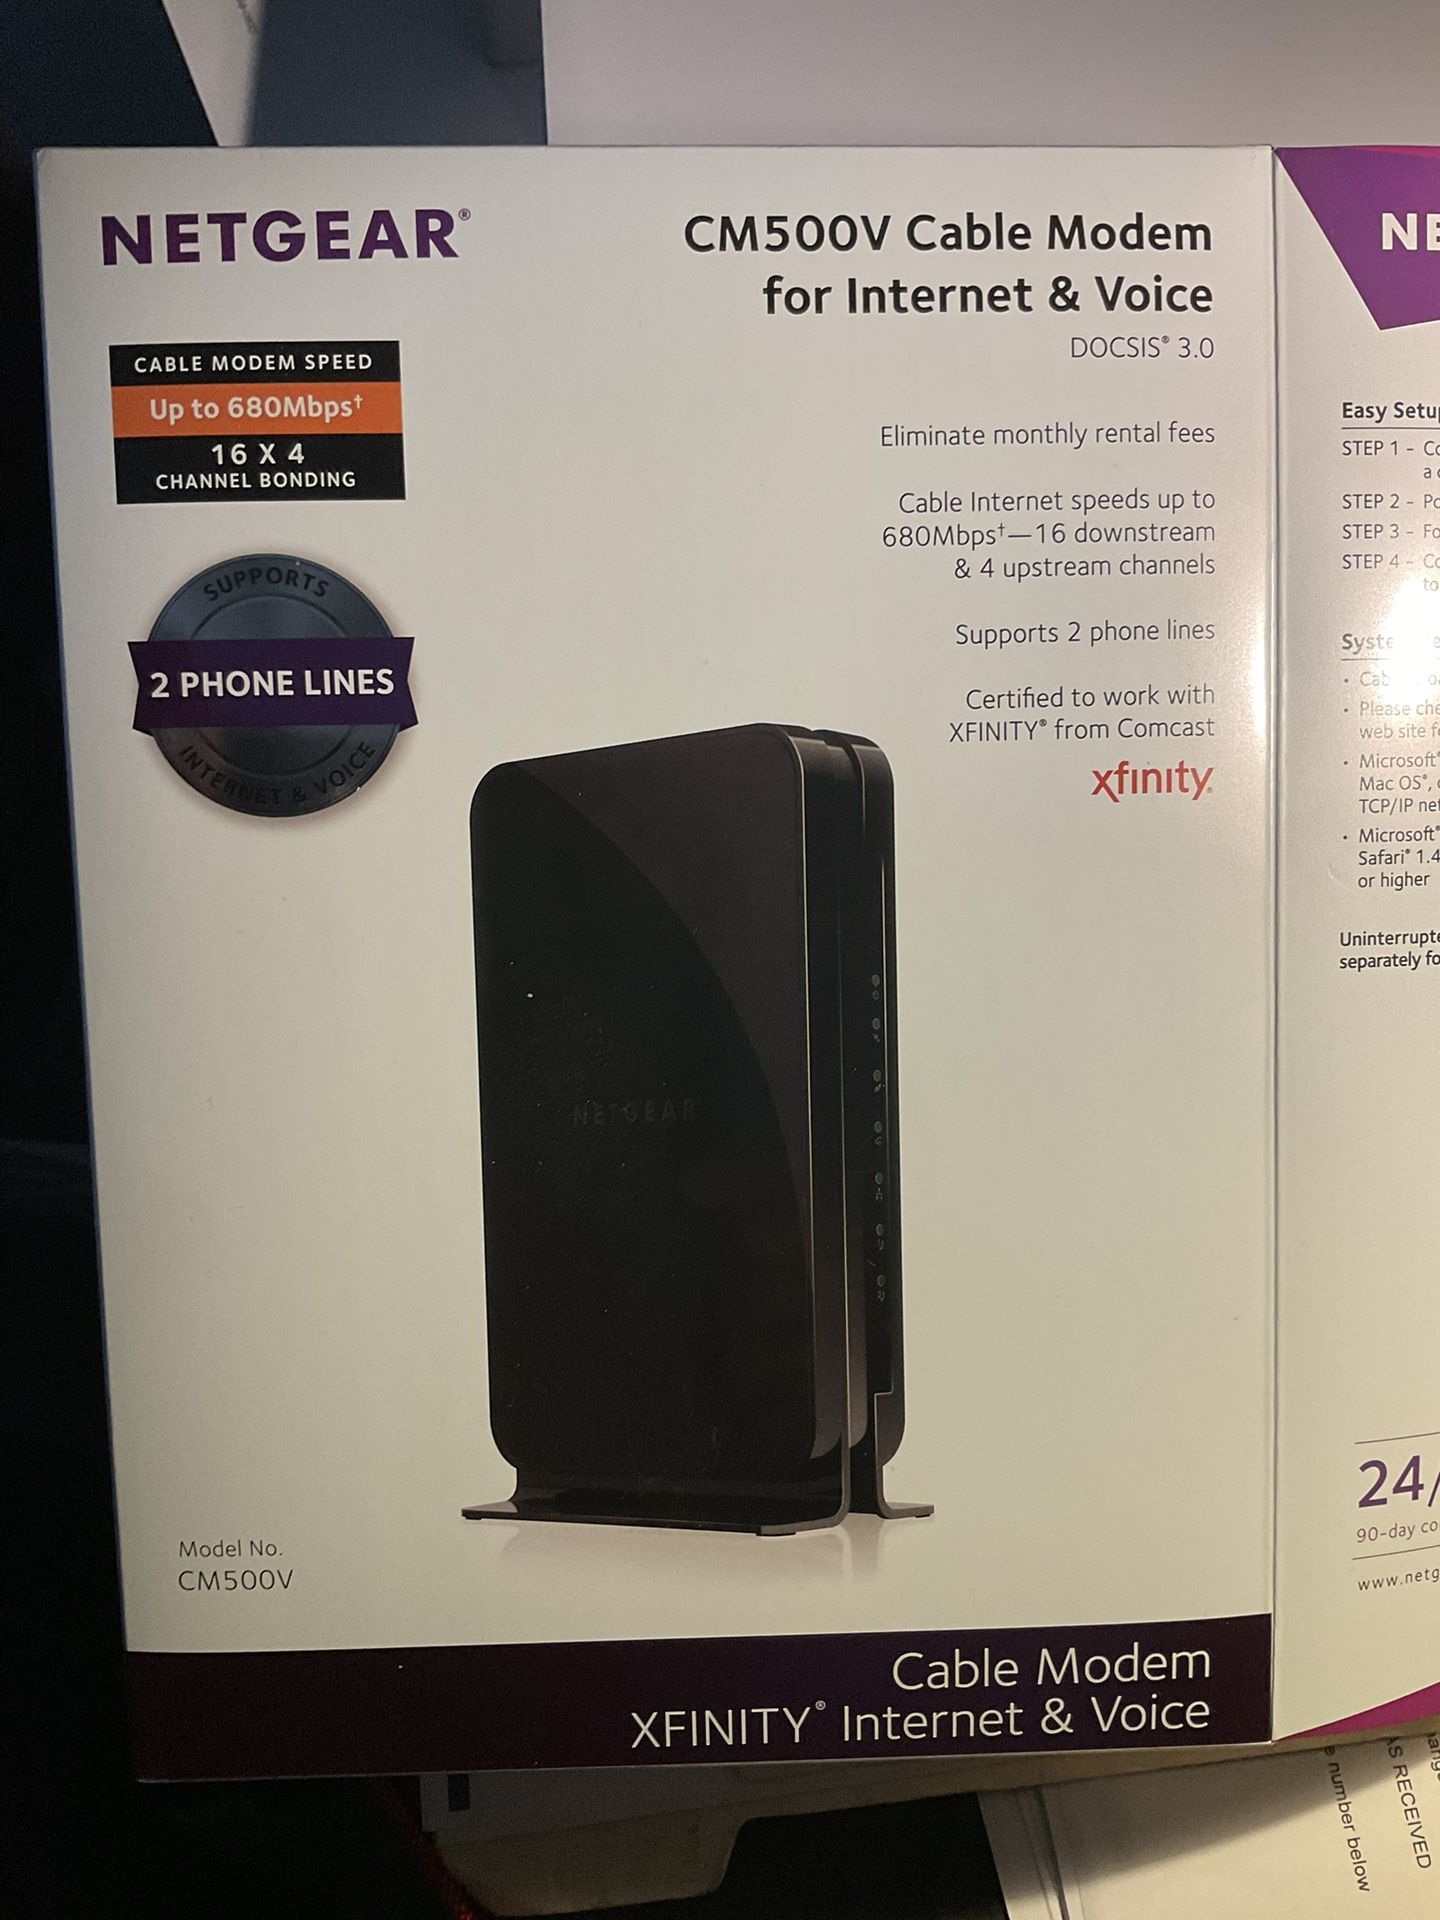 Netgear CM500V Cable Modem for Internet & Voice DOCSIS* 3.0, Certified to work with XFINITY® from Comcast